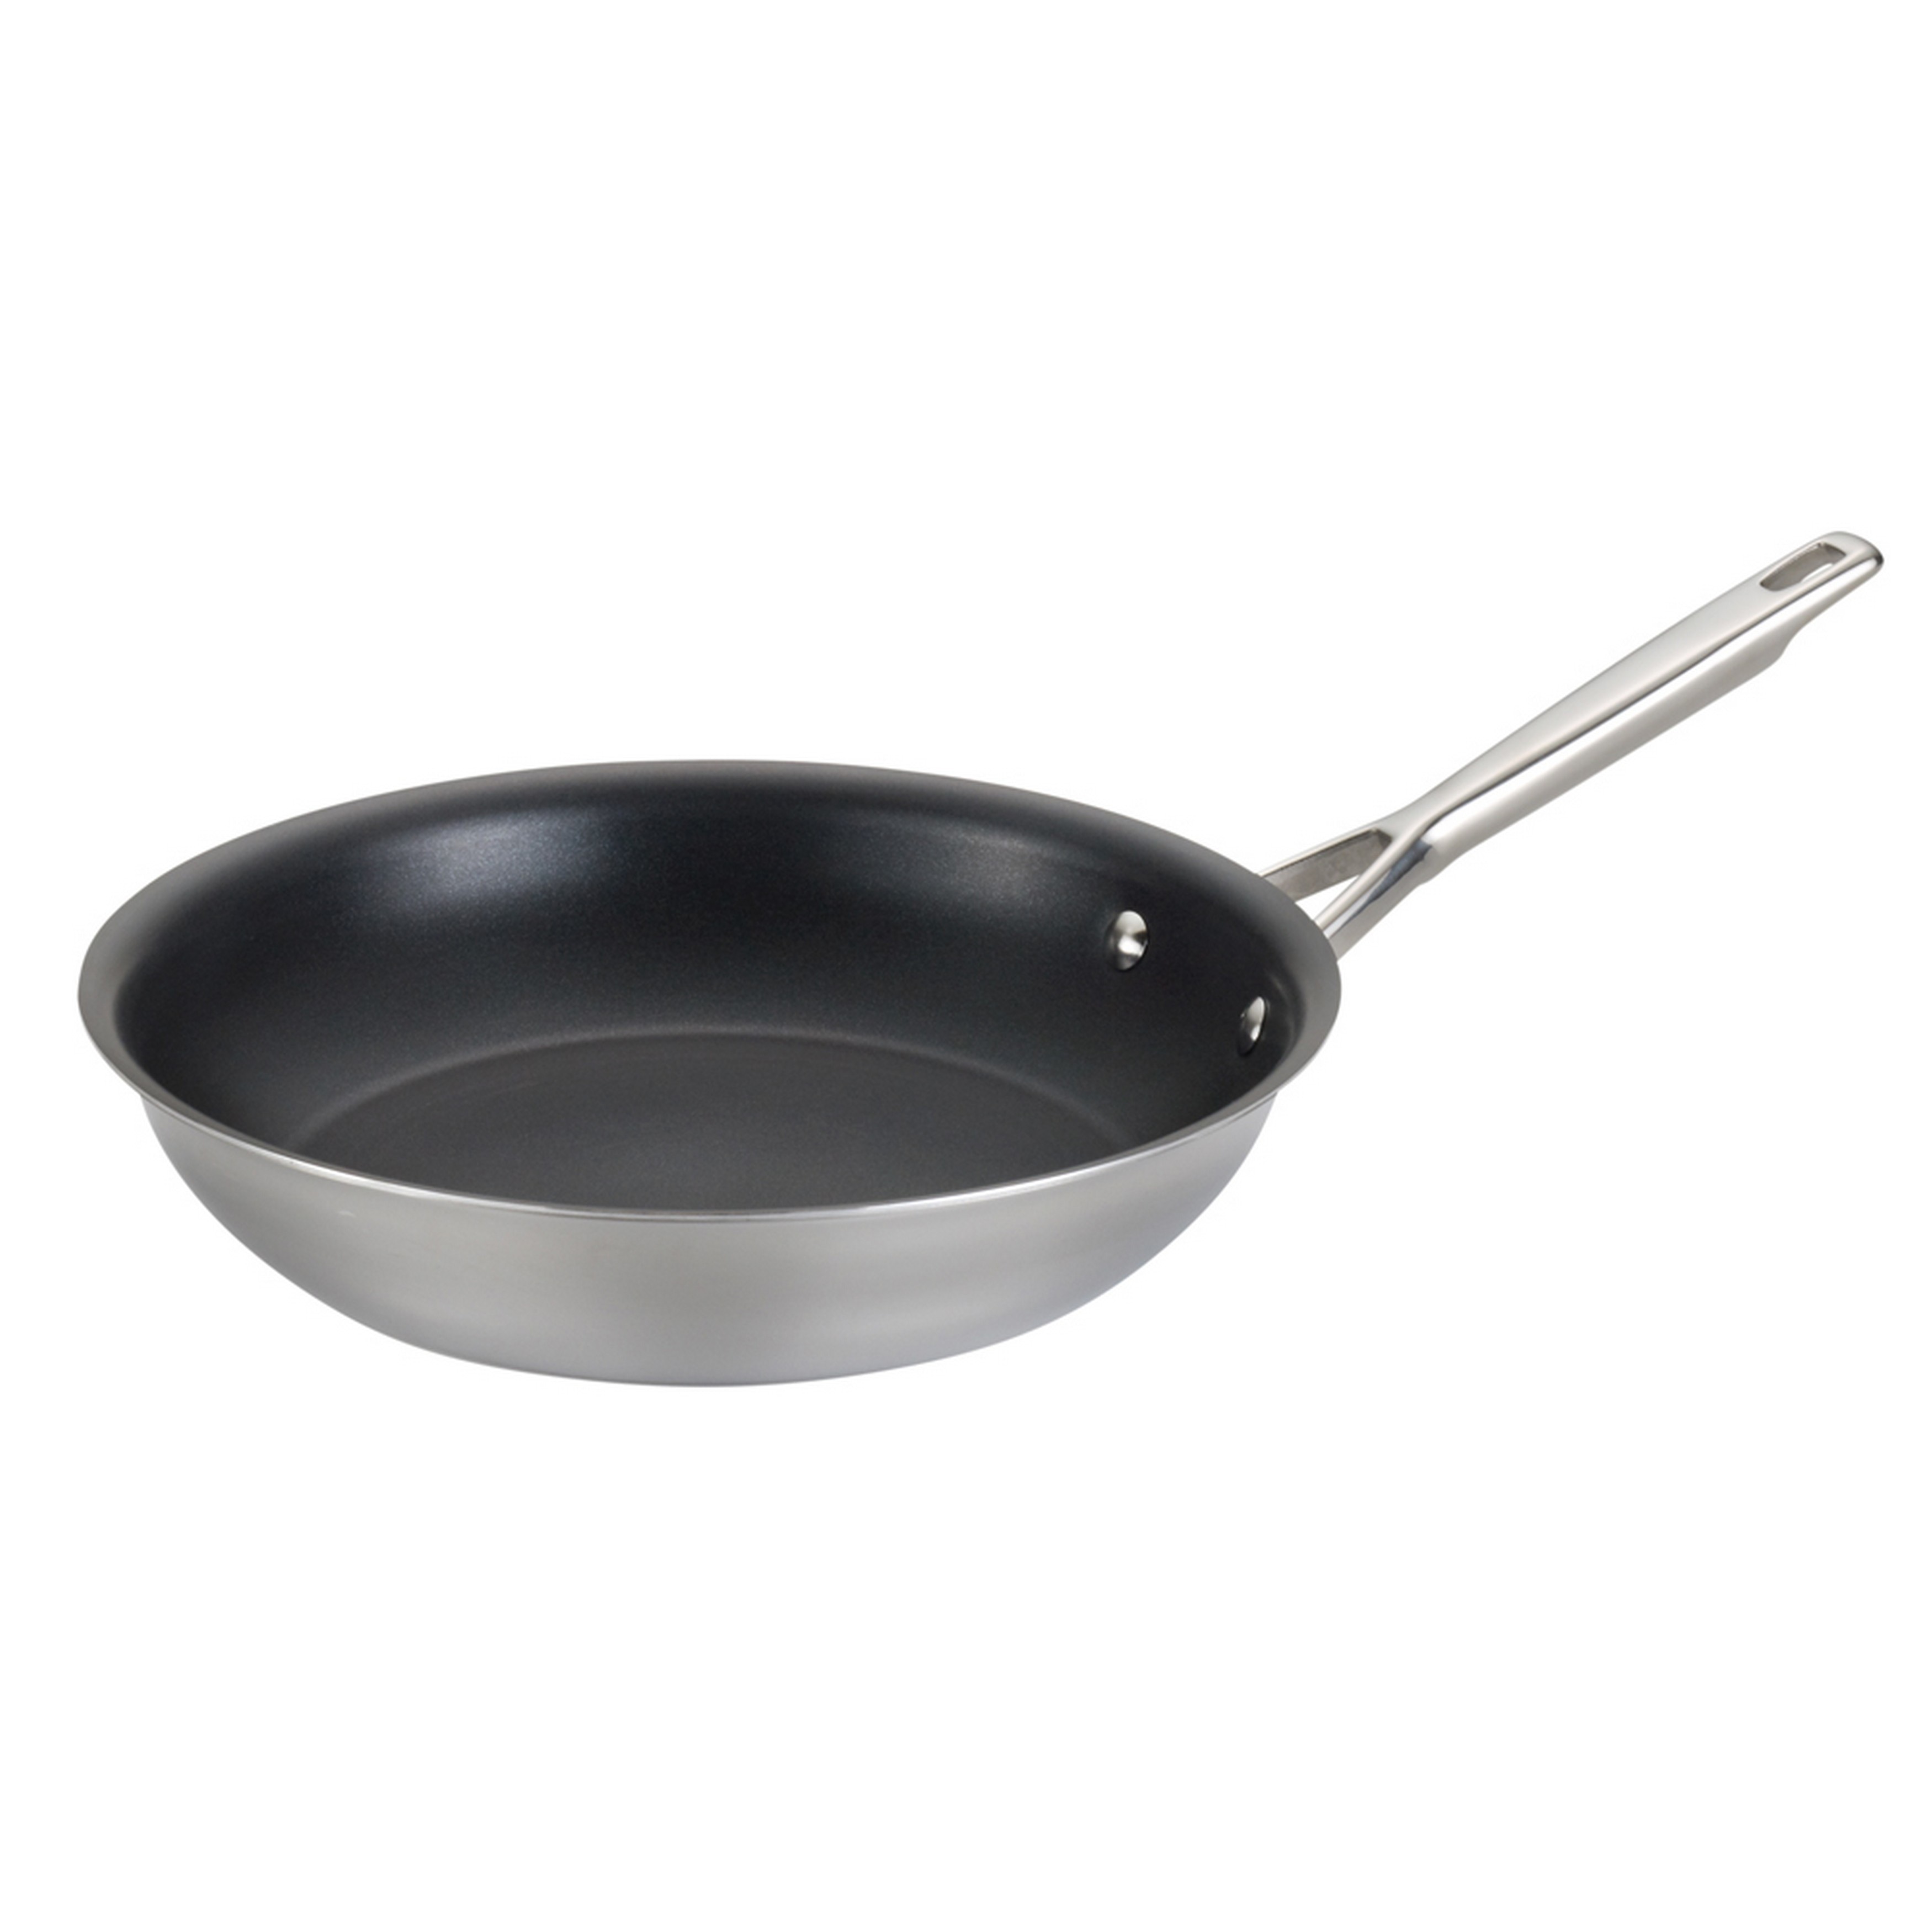 https://ak1.ostkcdn.com/images/products/9206705/Anolon-Tri-ply-Clad-Stainless-Steel-12-3-4-inch-Nonstick-French-Skillet-8e219016-489e-4d63-bd5b-a545ac2d1986.jpg